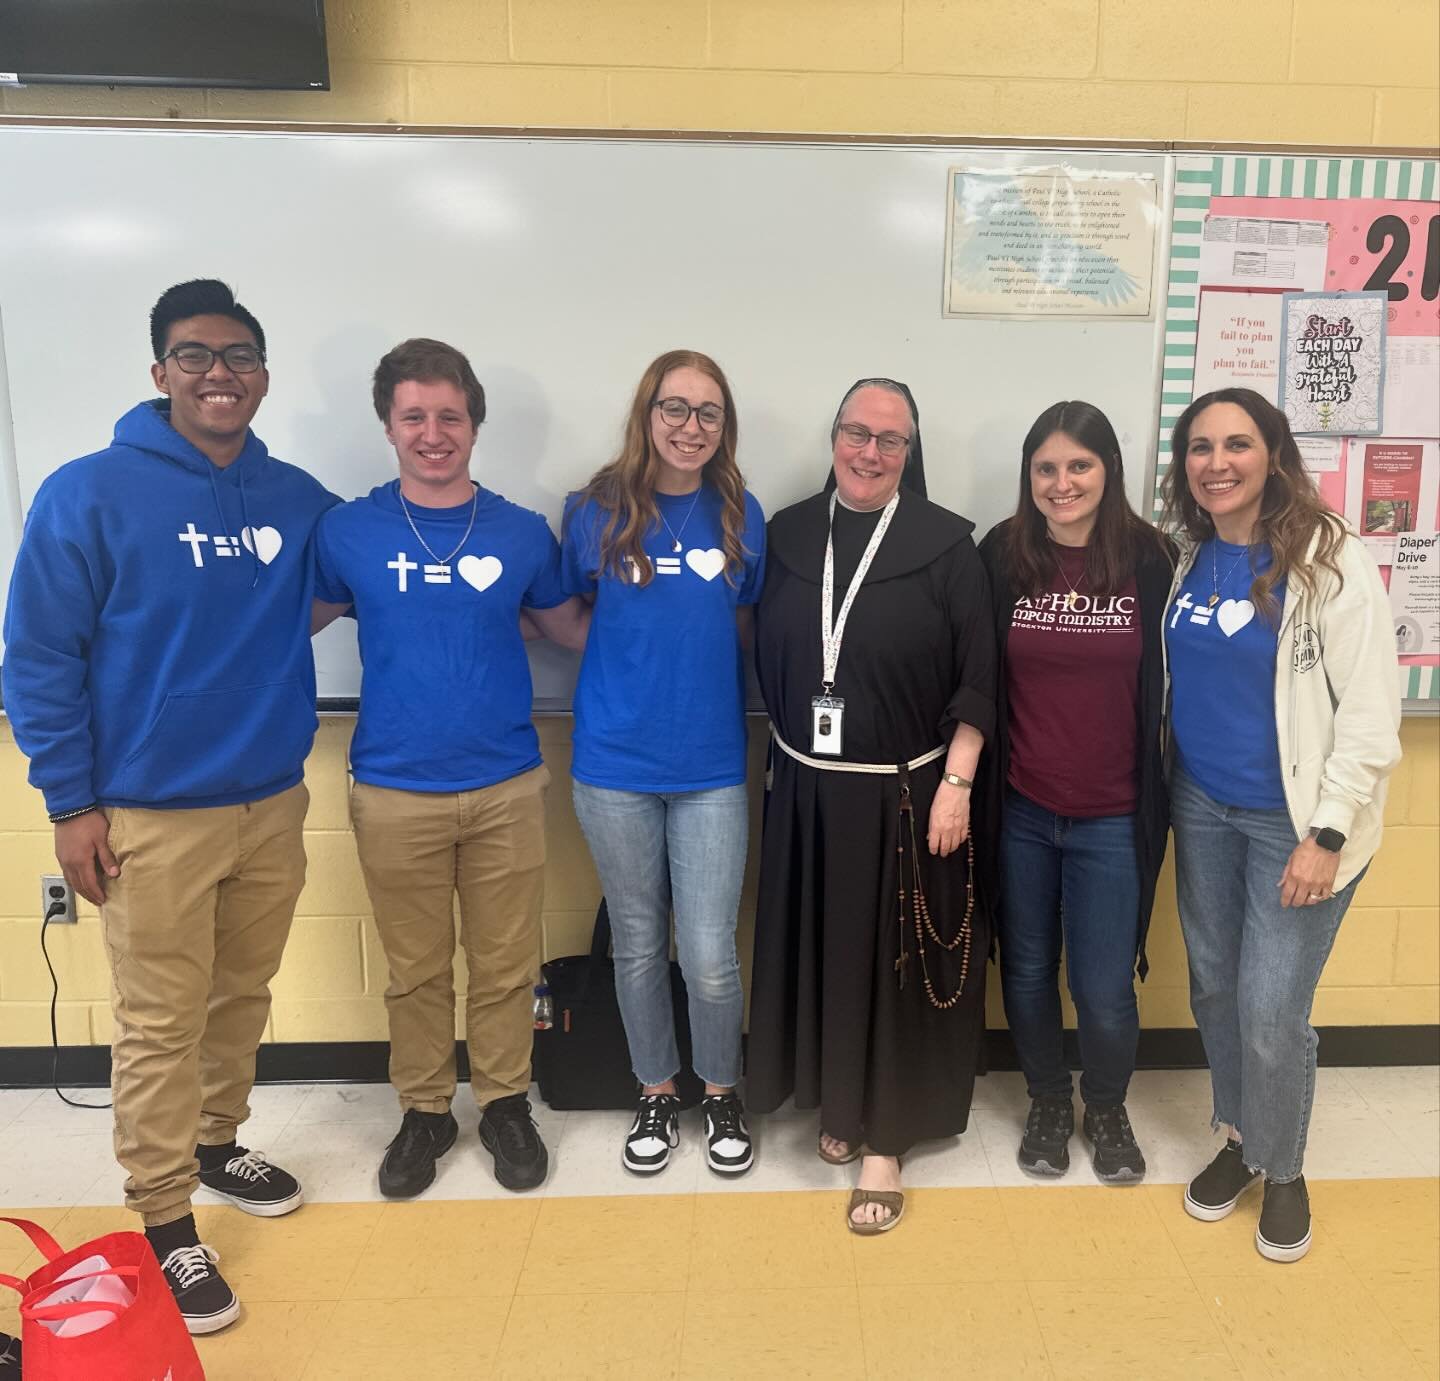 Another week and another day to speak at a @camdendiocese Catholic High School! Today Rowan Catholic Campus Ministry &amp; @stocktonnewmanclub spoke at @paulvihs. We shared about our Newman Houses and ministries. Thank you to Sr. Dianna, Fr. Ramos an